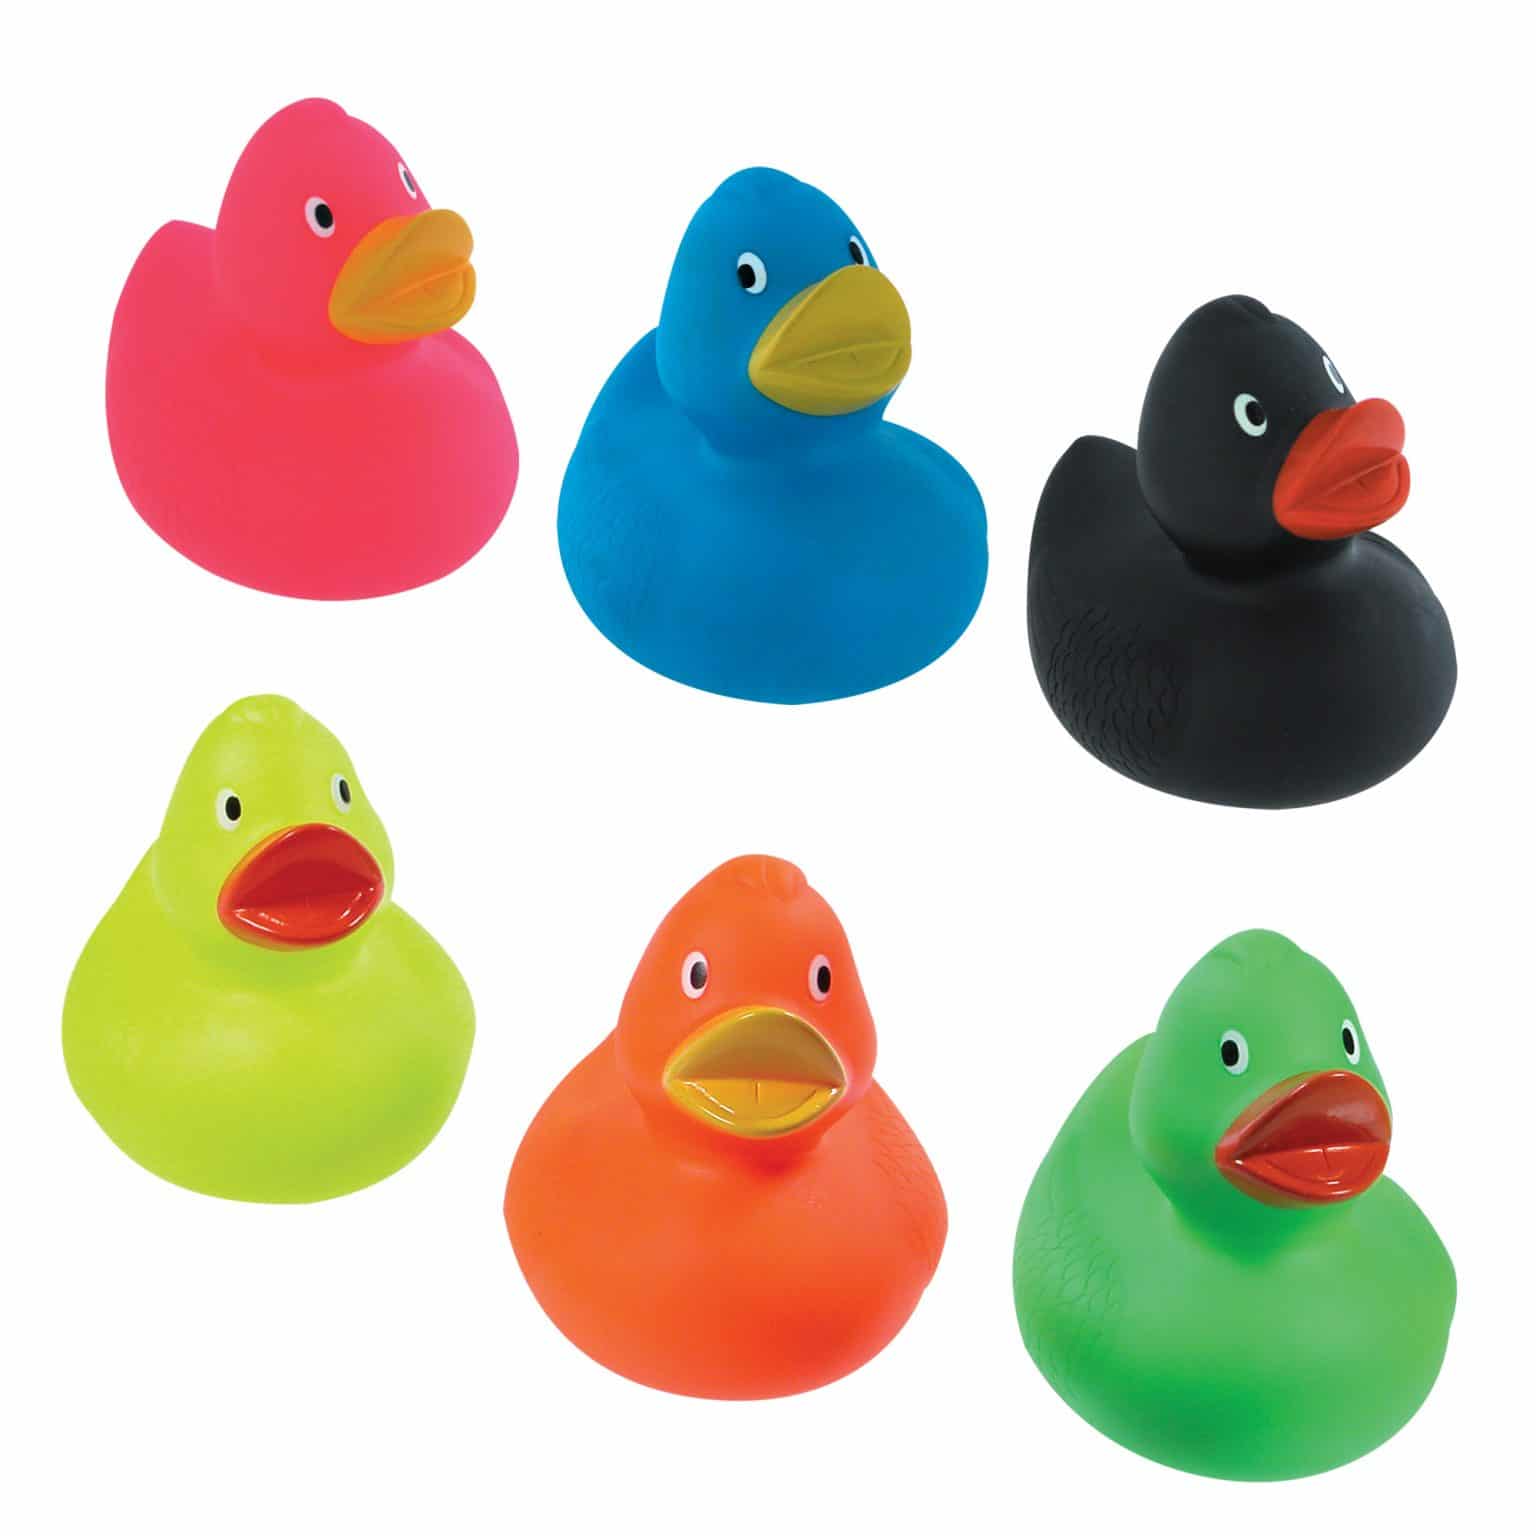 Rubber Duckies Multi Colors Schylling 3662